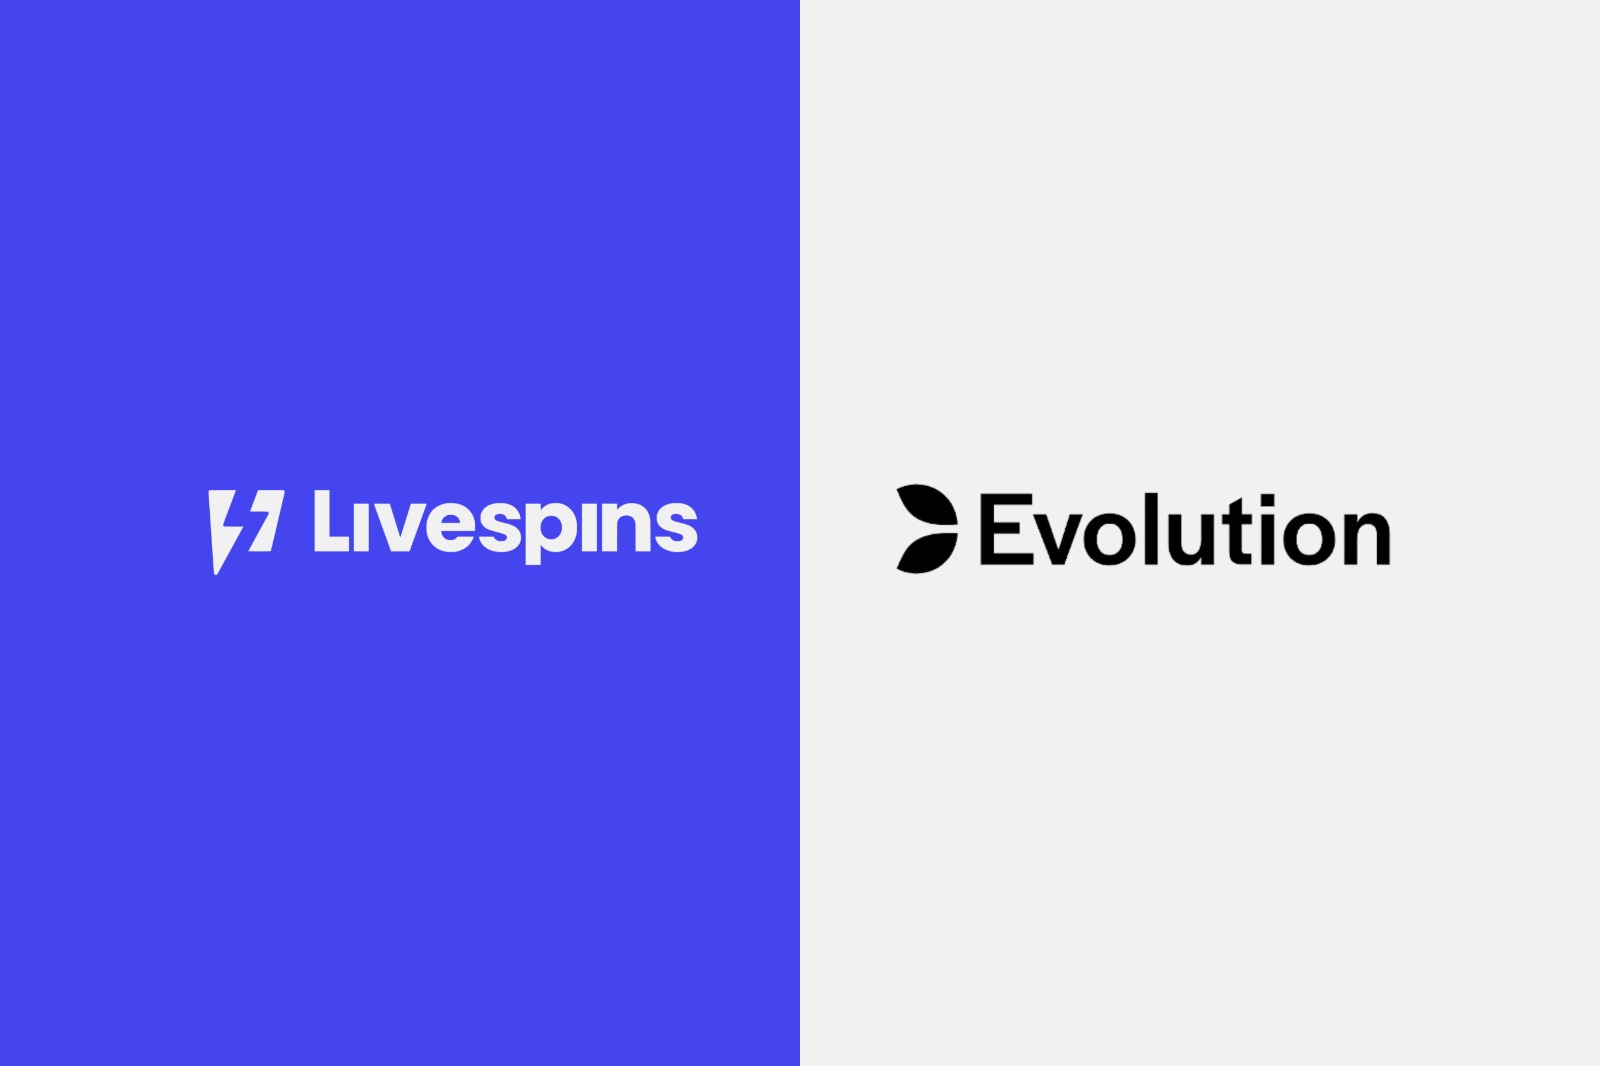 Evolution has entered into an agreement to acquire Livespins, a B2B provider enabling operators to offer players to bet-behind their favourite streamers